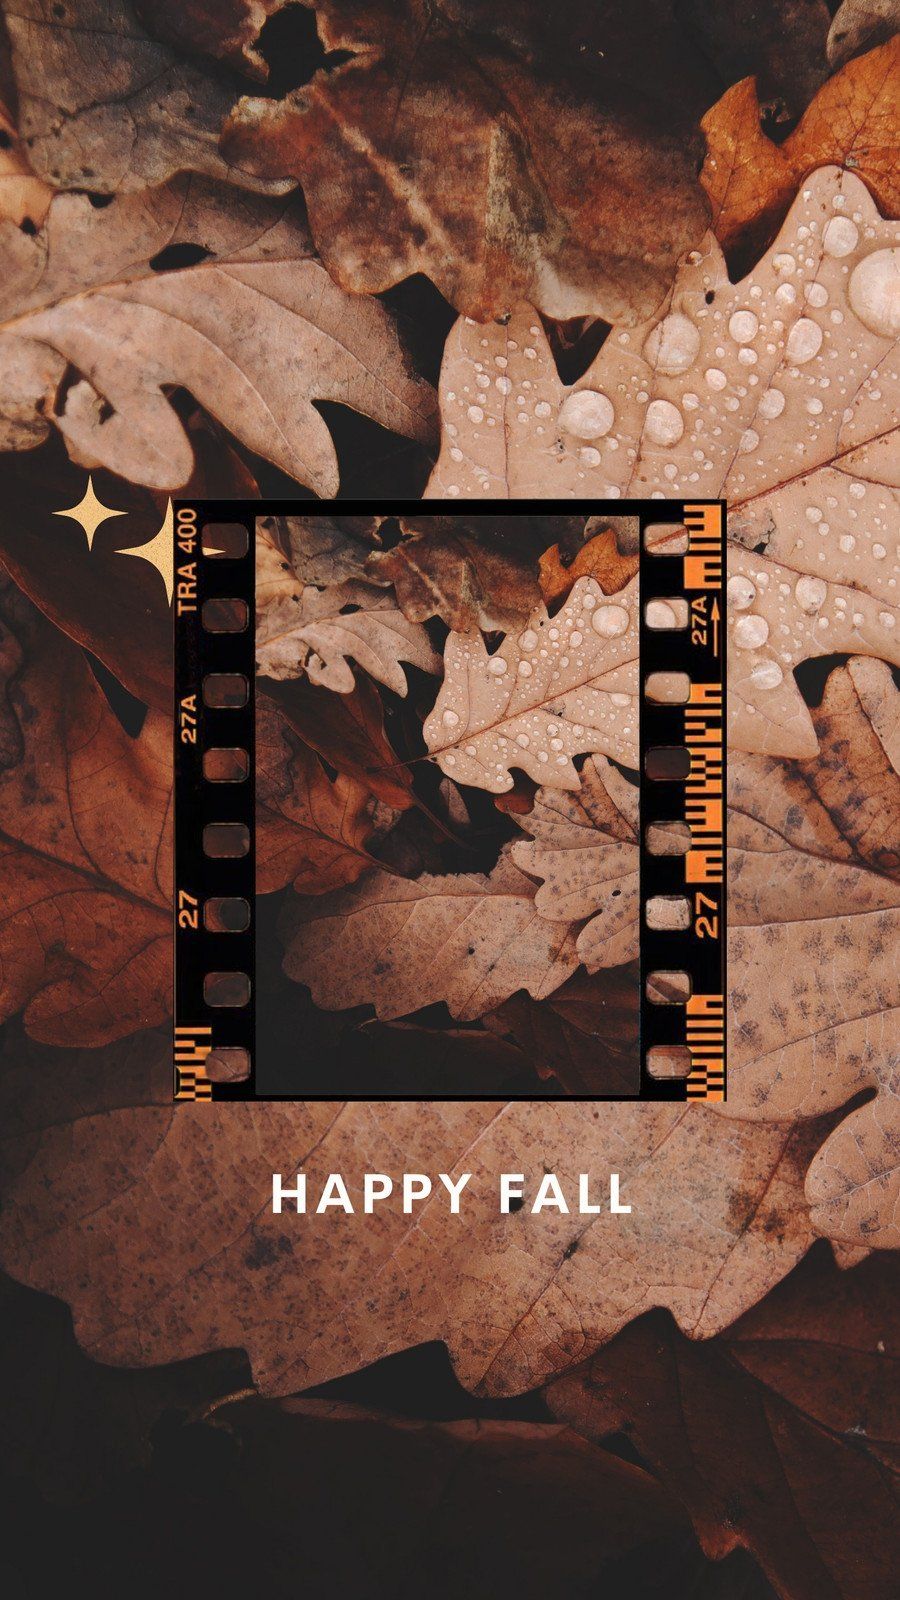 Happy fall from the leaves! - Vintage fall